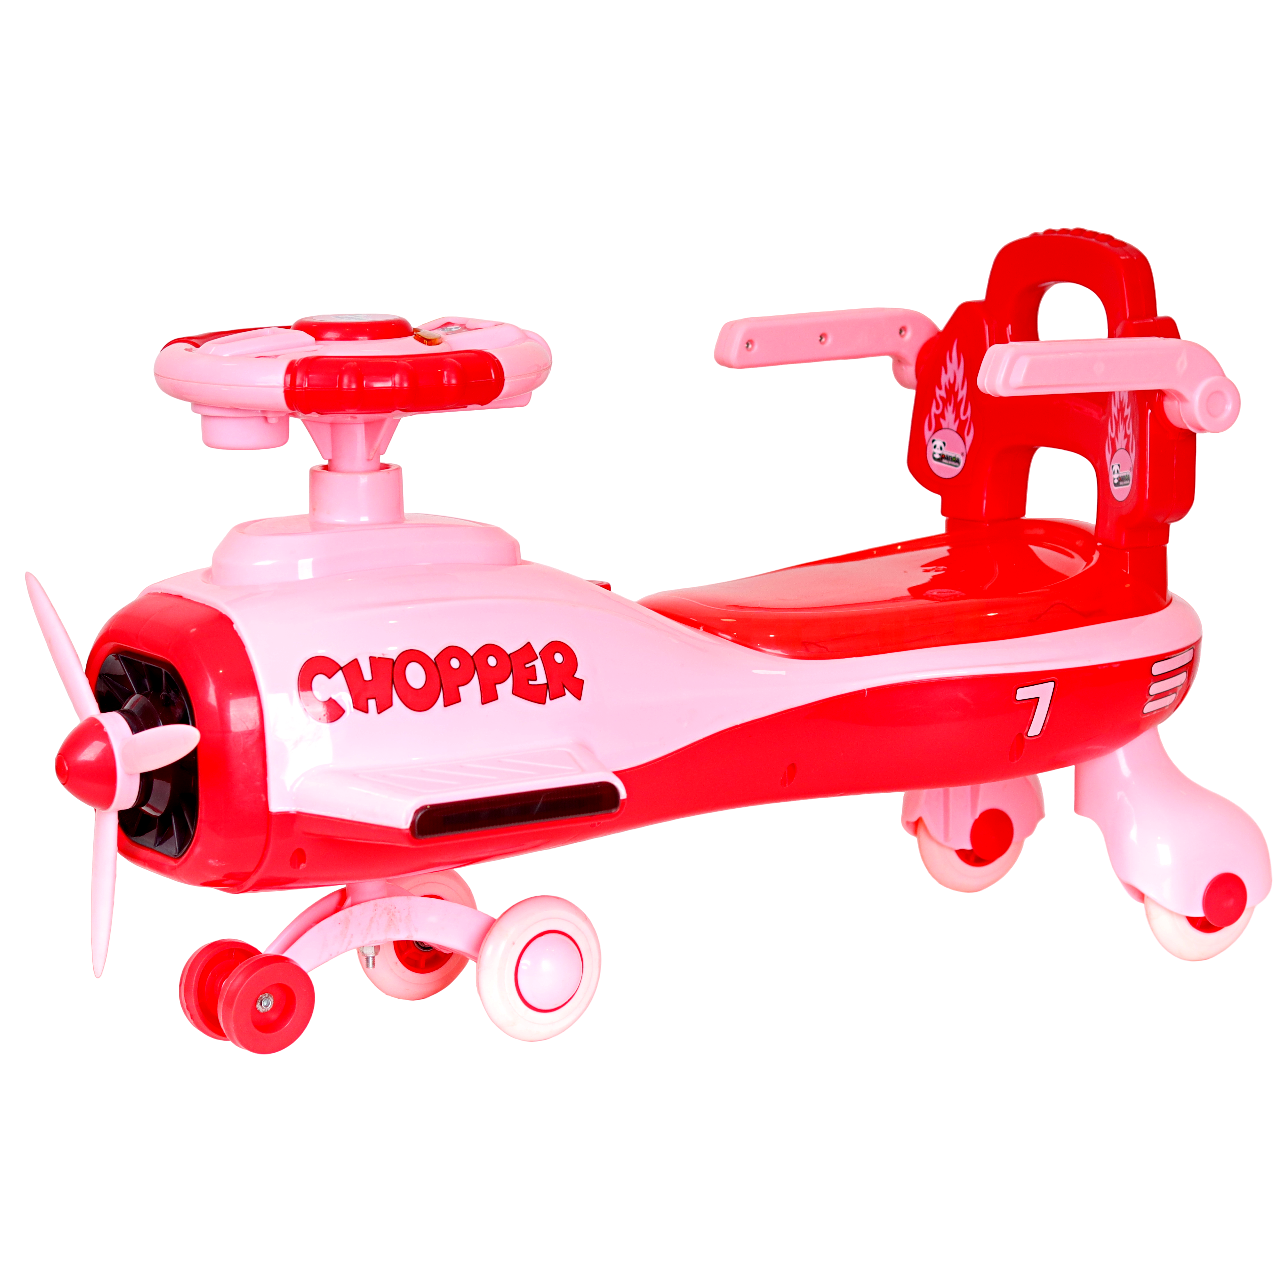 Panda Chopper Musical Magic Car: The Ultimate Ride-On Toy for Kids 2-8 Years with Music, Lights, and Helicopter-Inspired Adventure